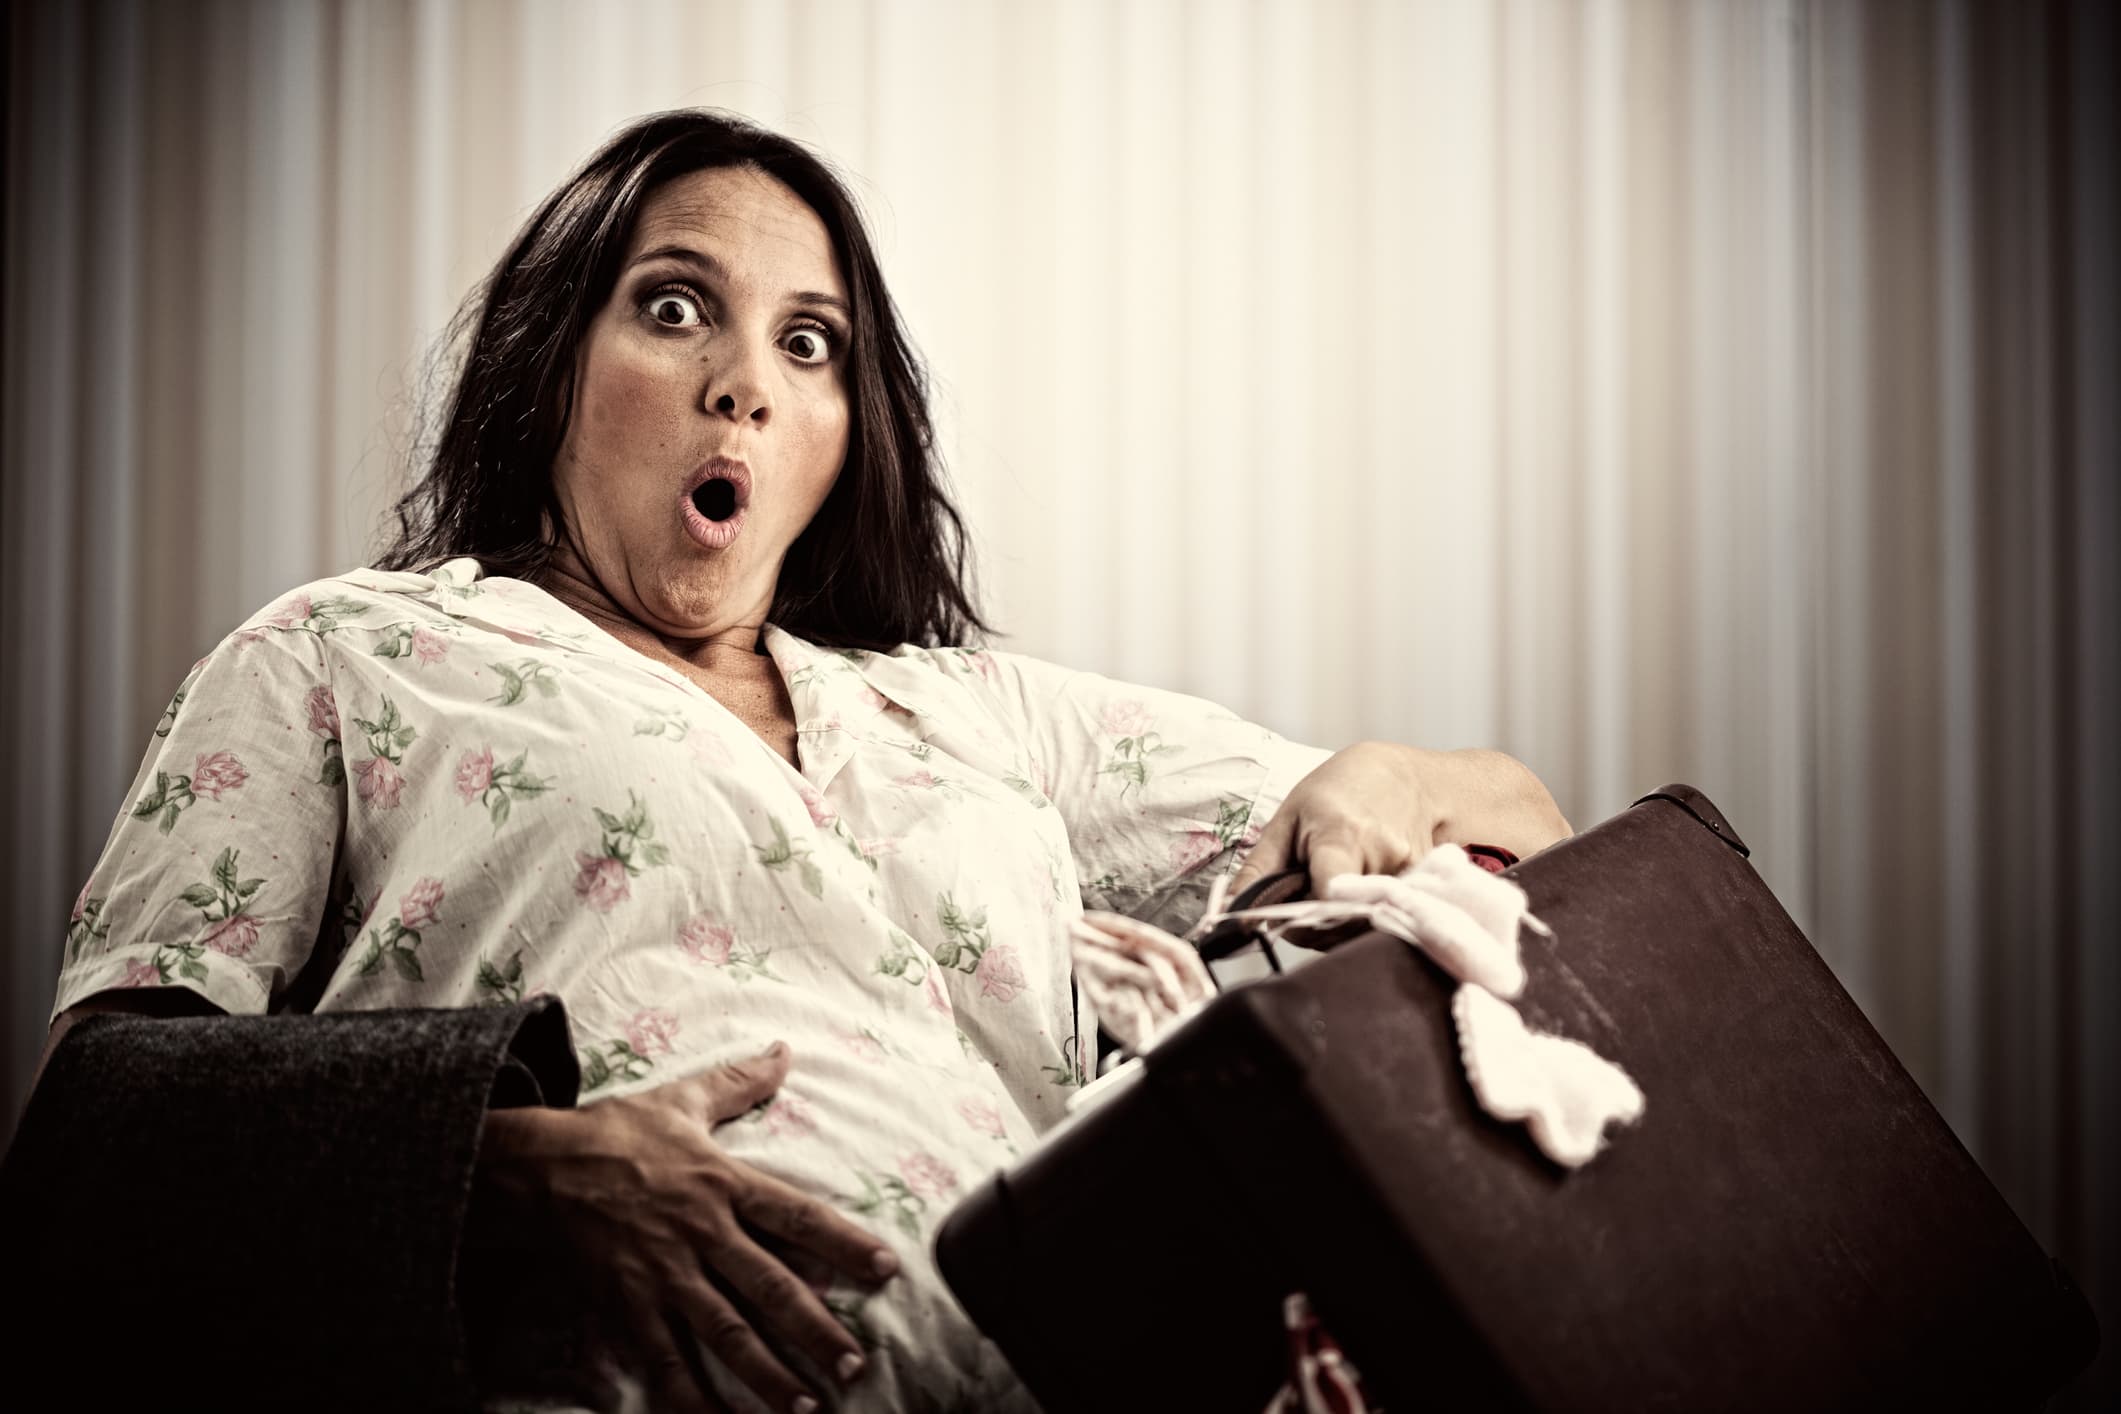 A woman is about to give birth in the hospital's waiting area.